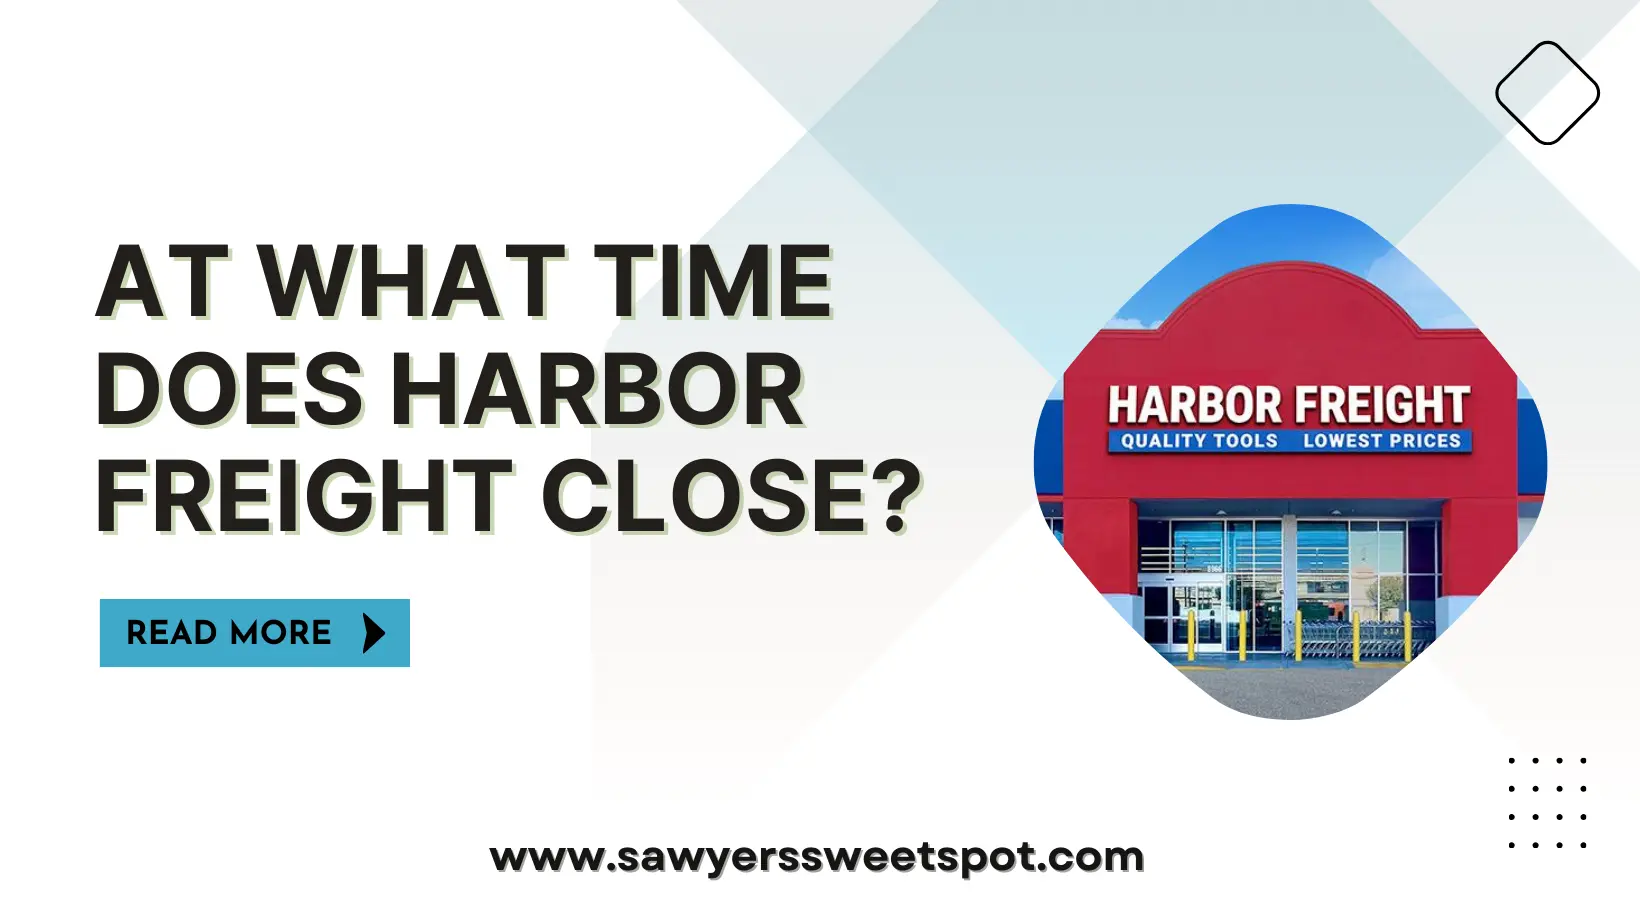 At What Time Does Harbor Freight Close?